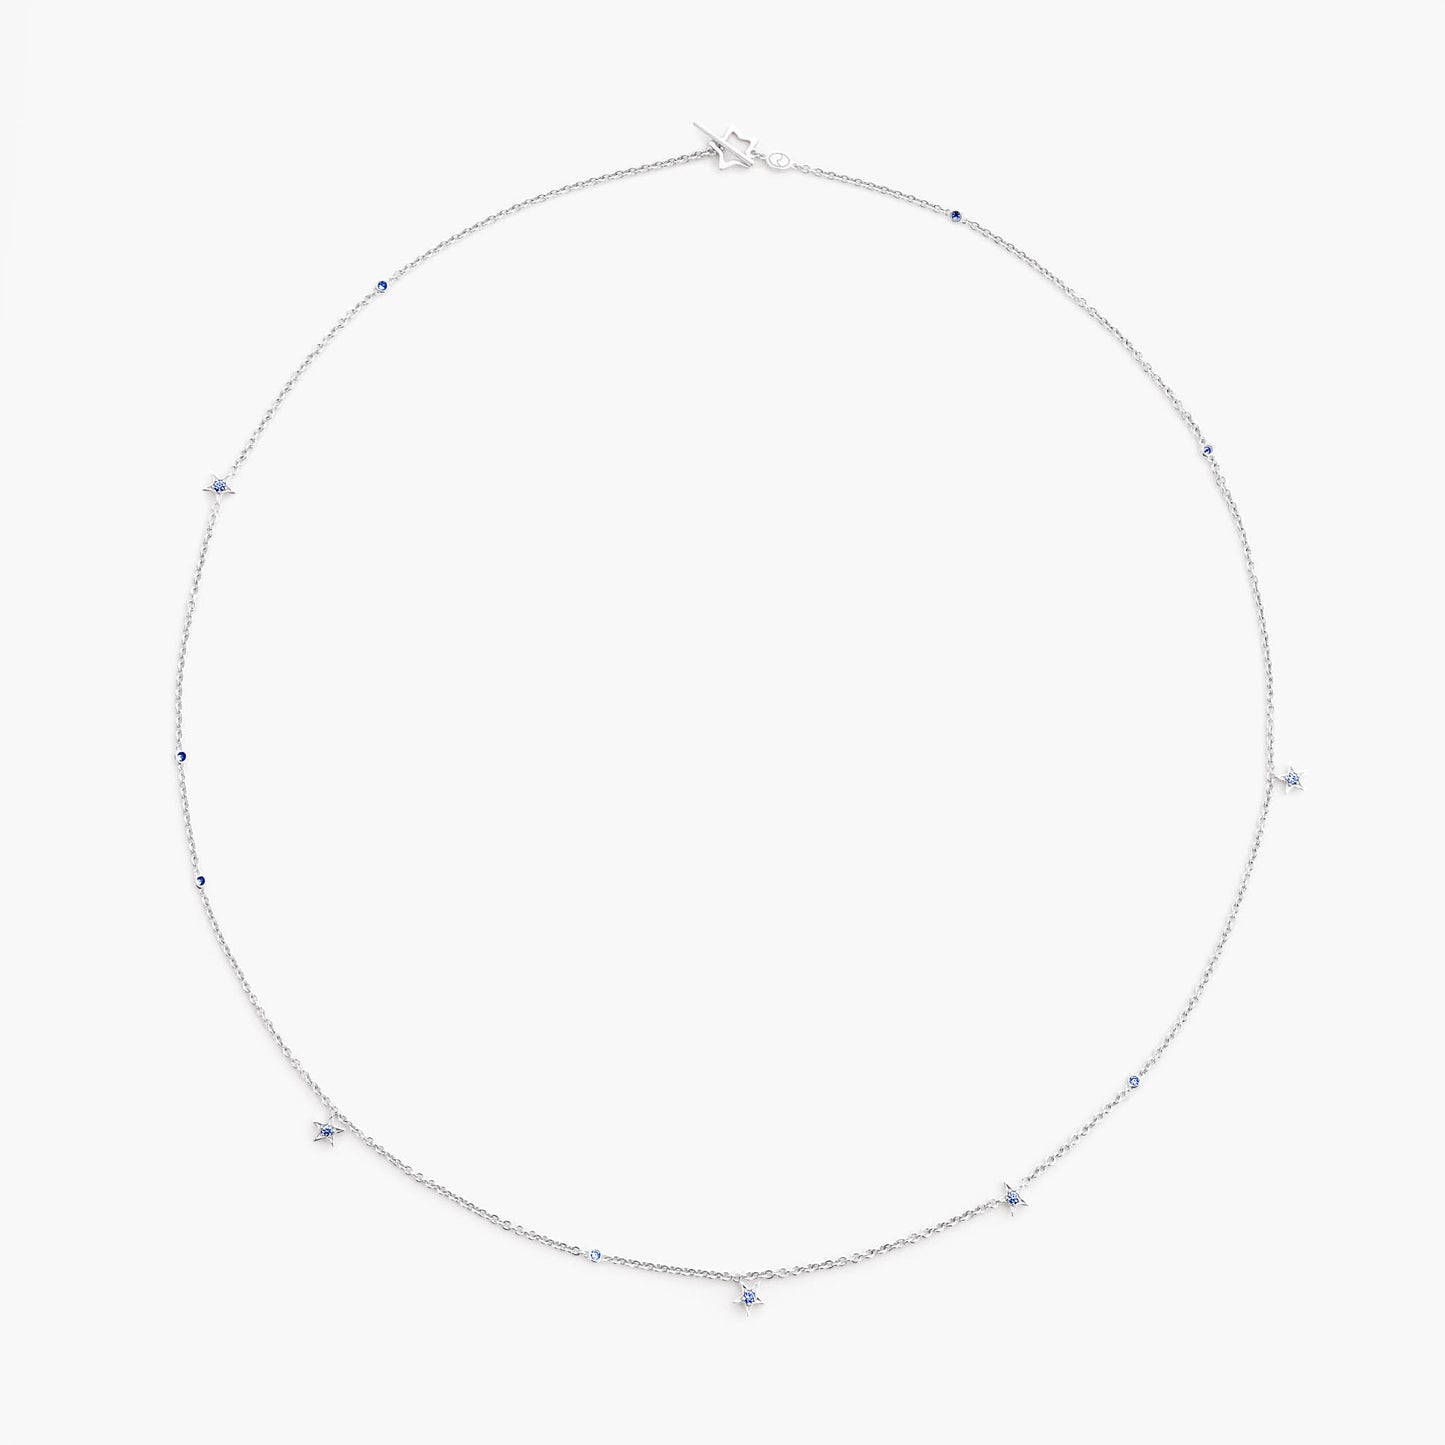 Guiding Star 18ct White Gold & Sapphire Necklace, 70cm